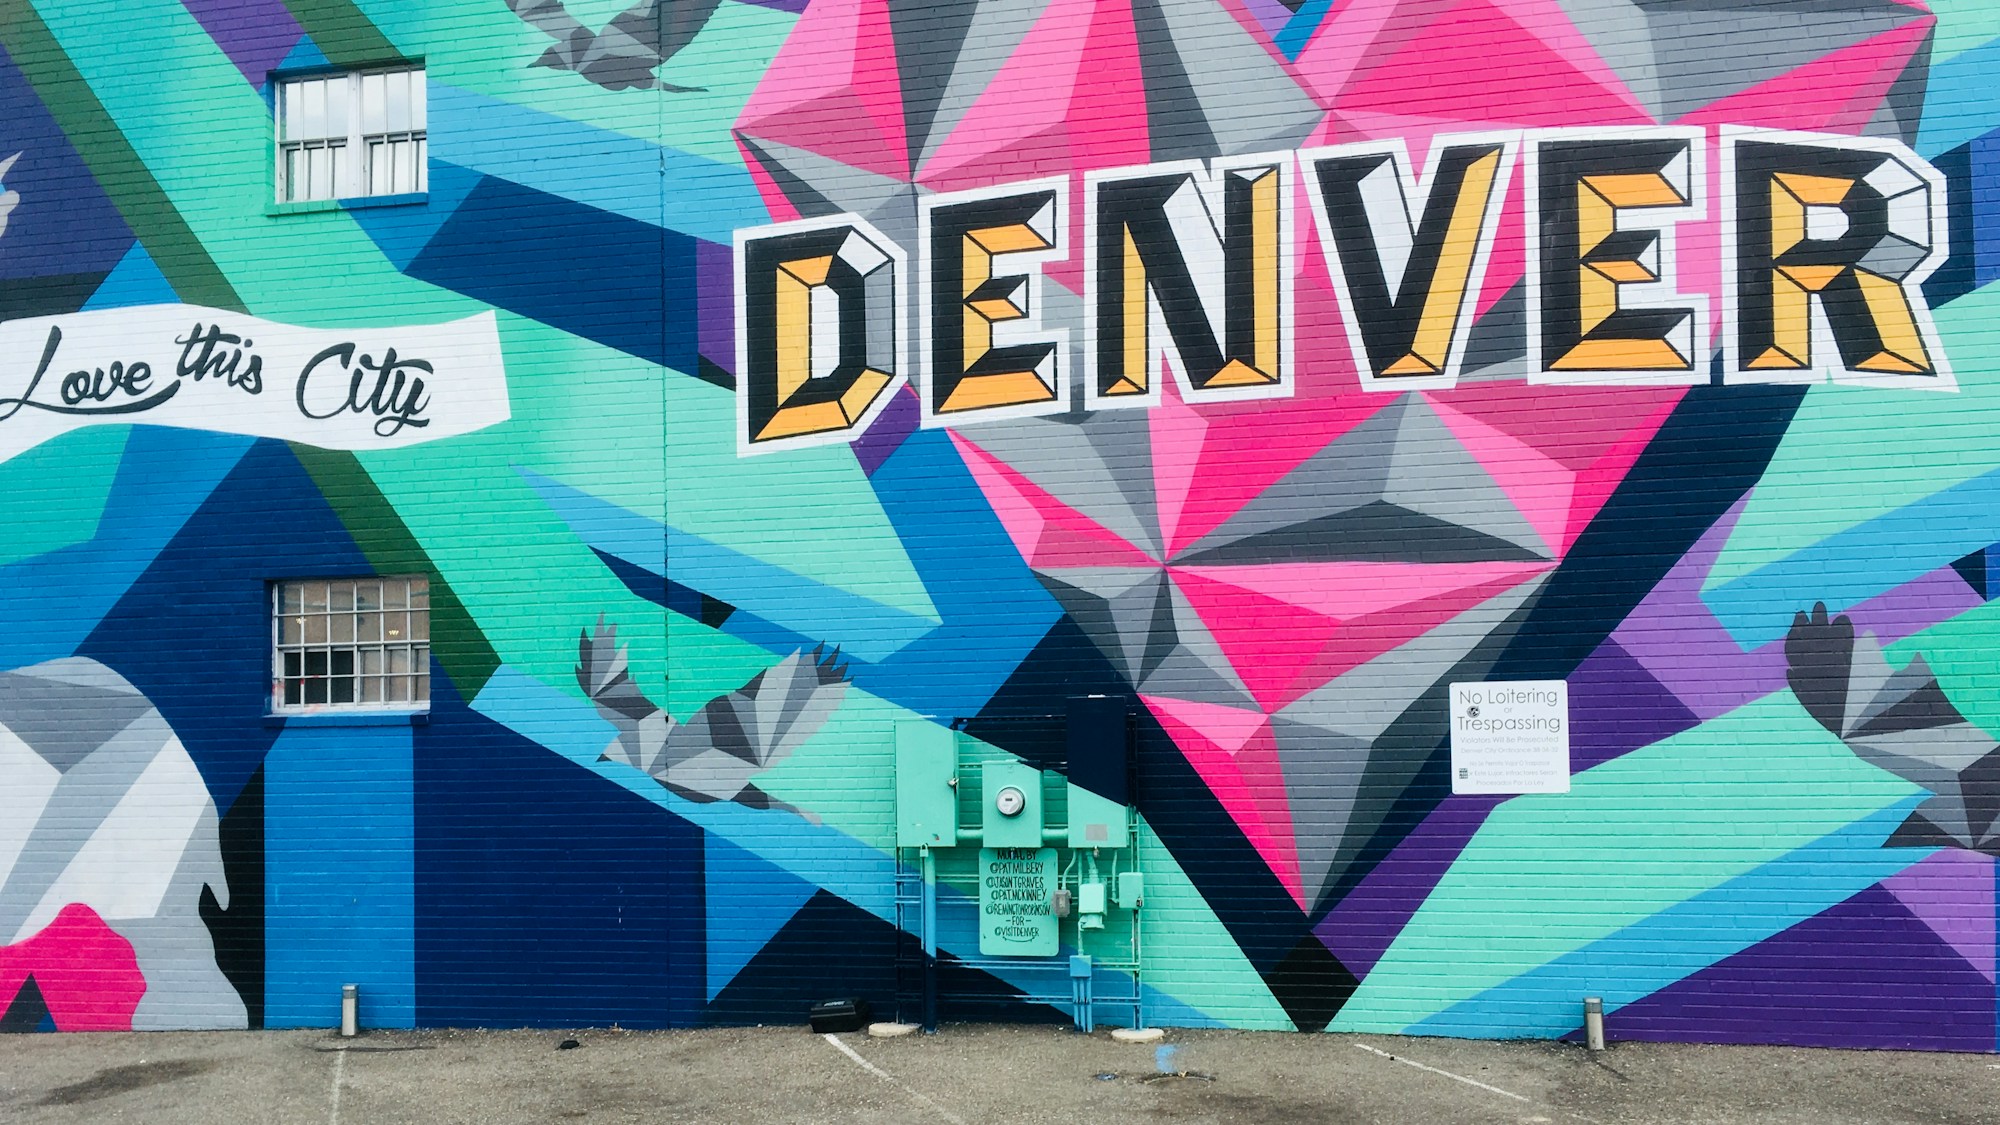 What to See in Denver: Travel Guide & Recommendations